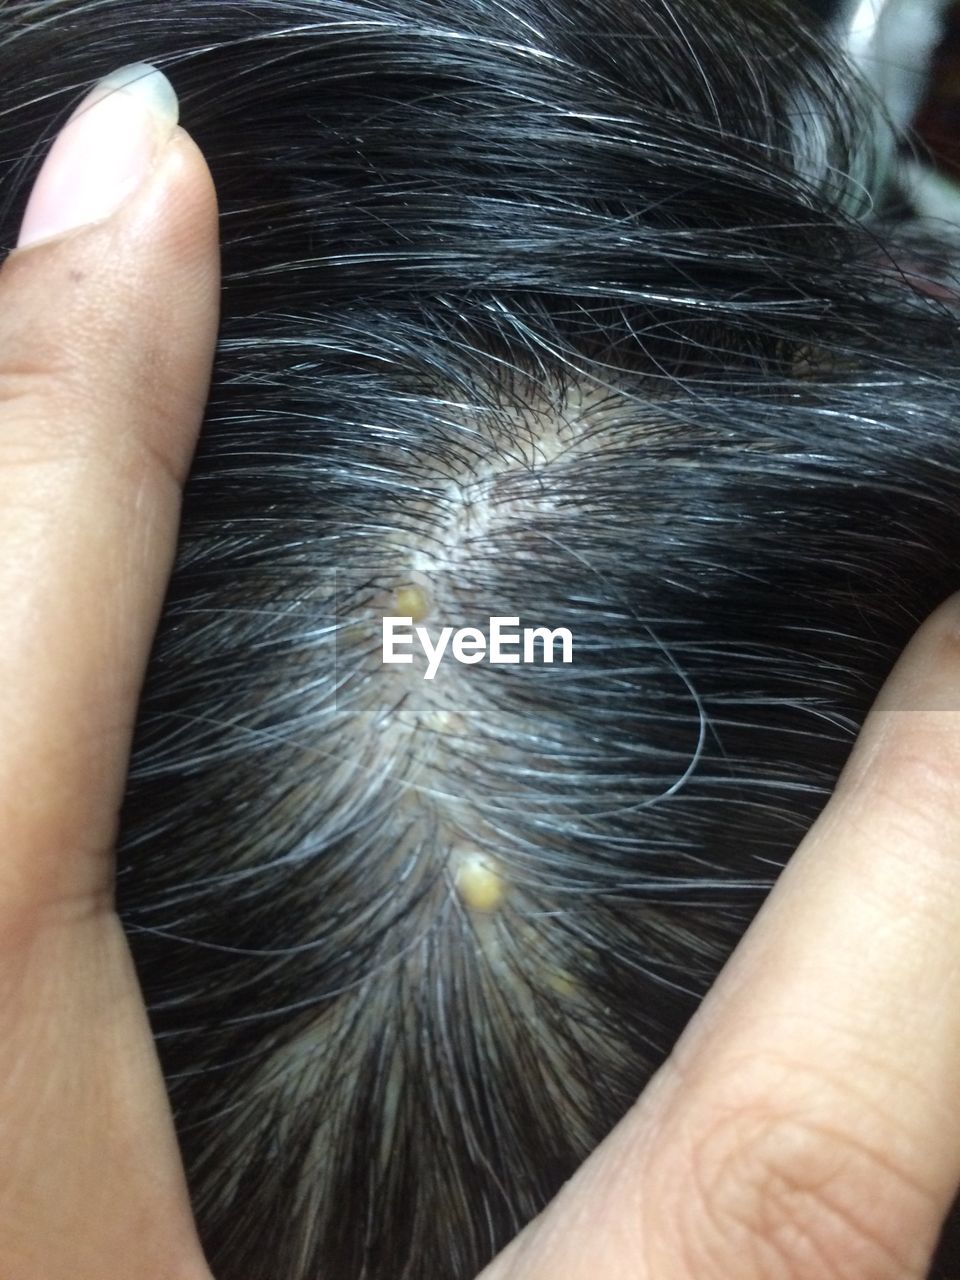 Cropped image of human hair and hand